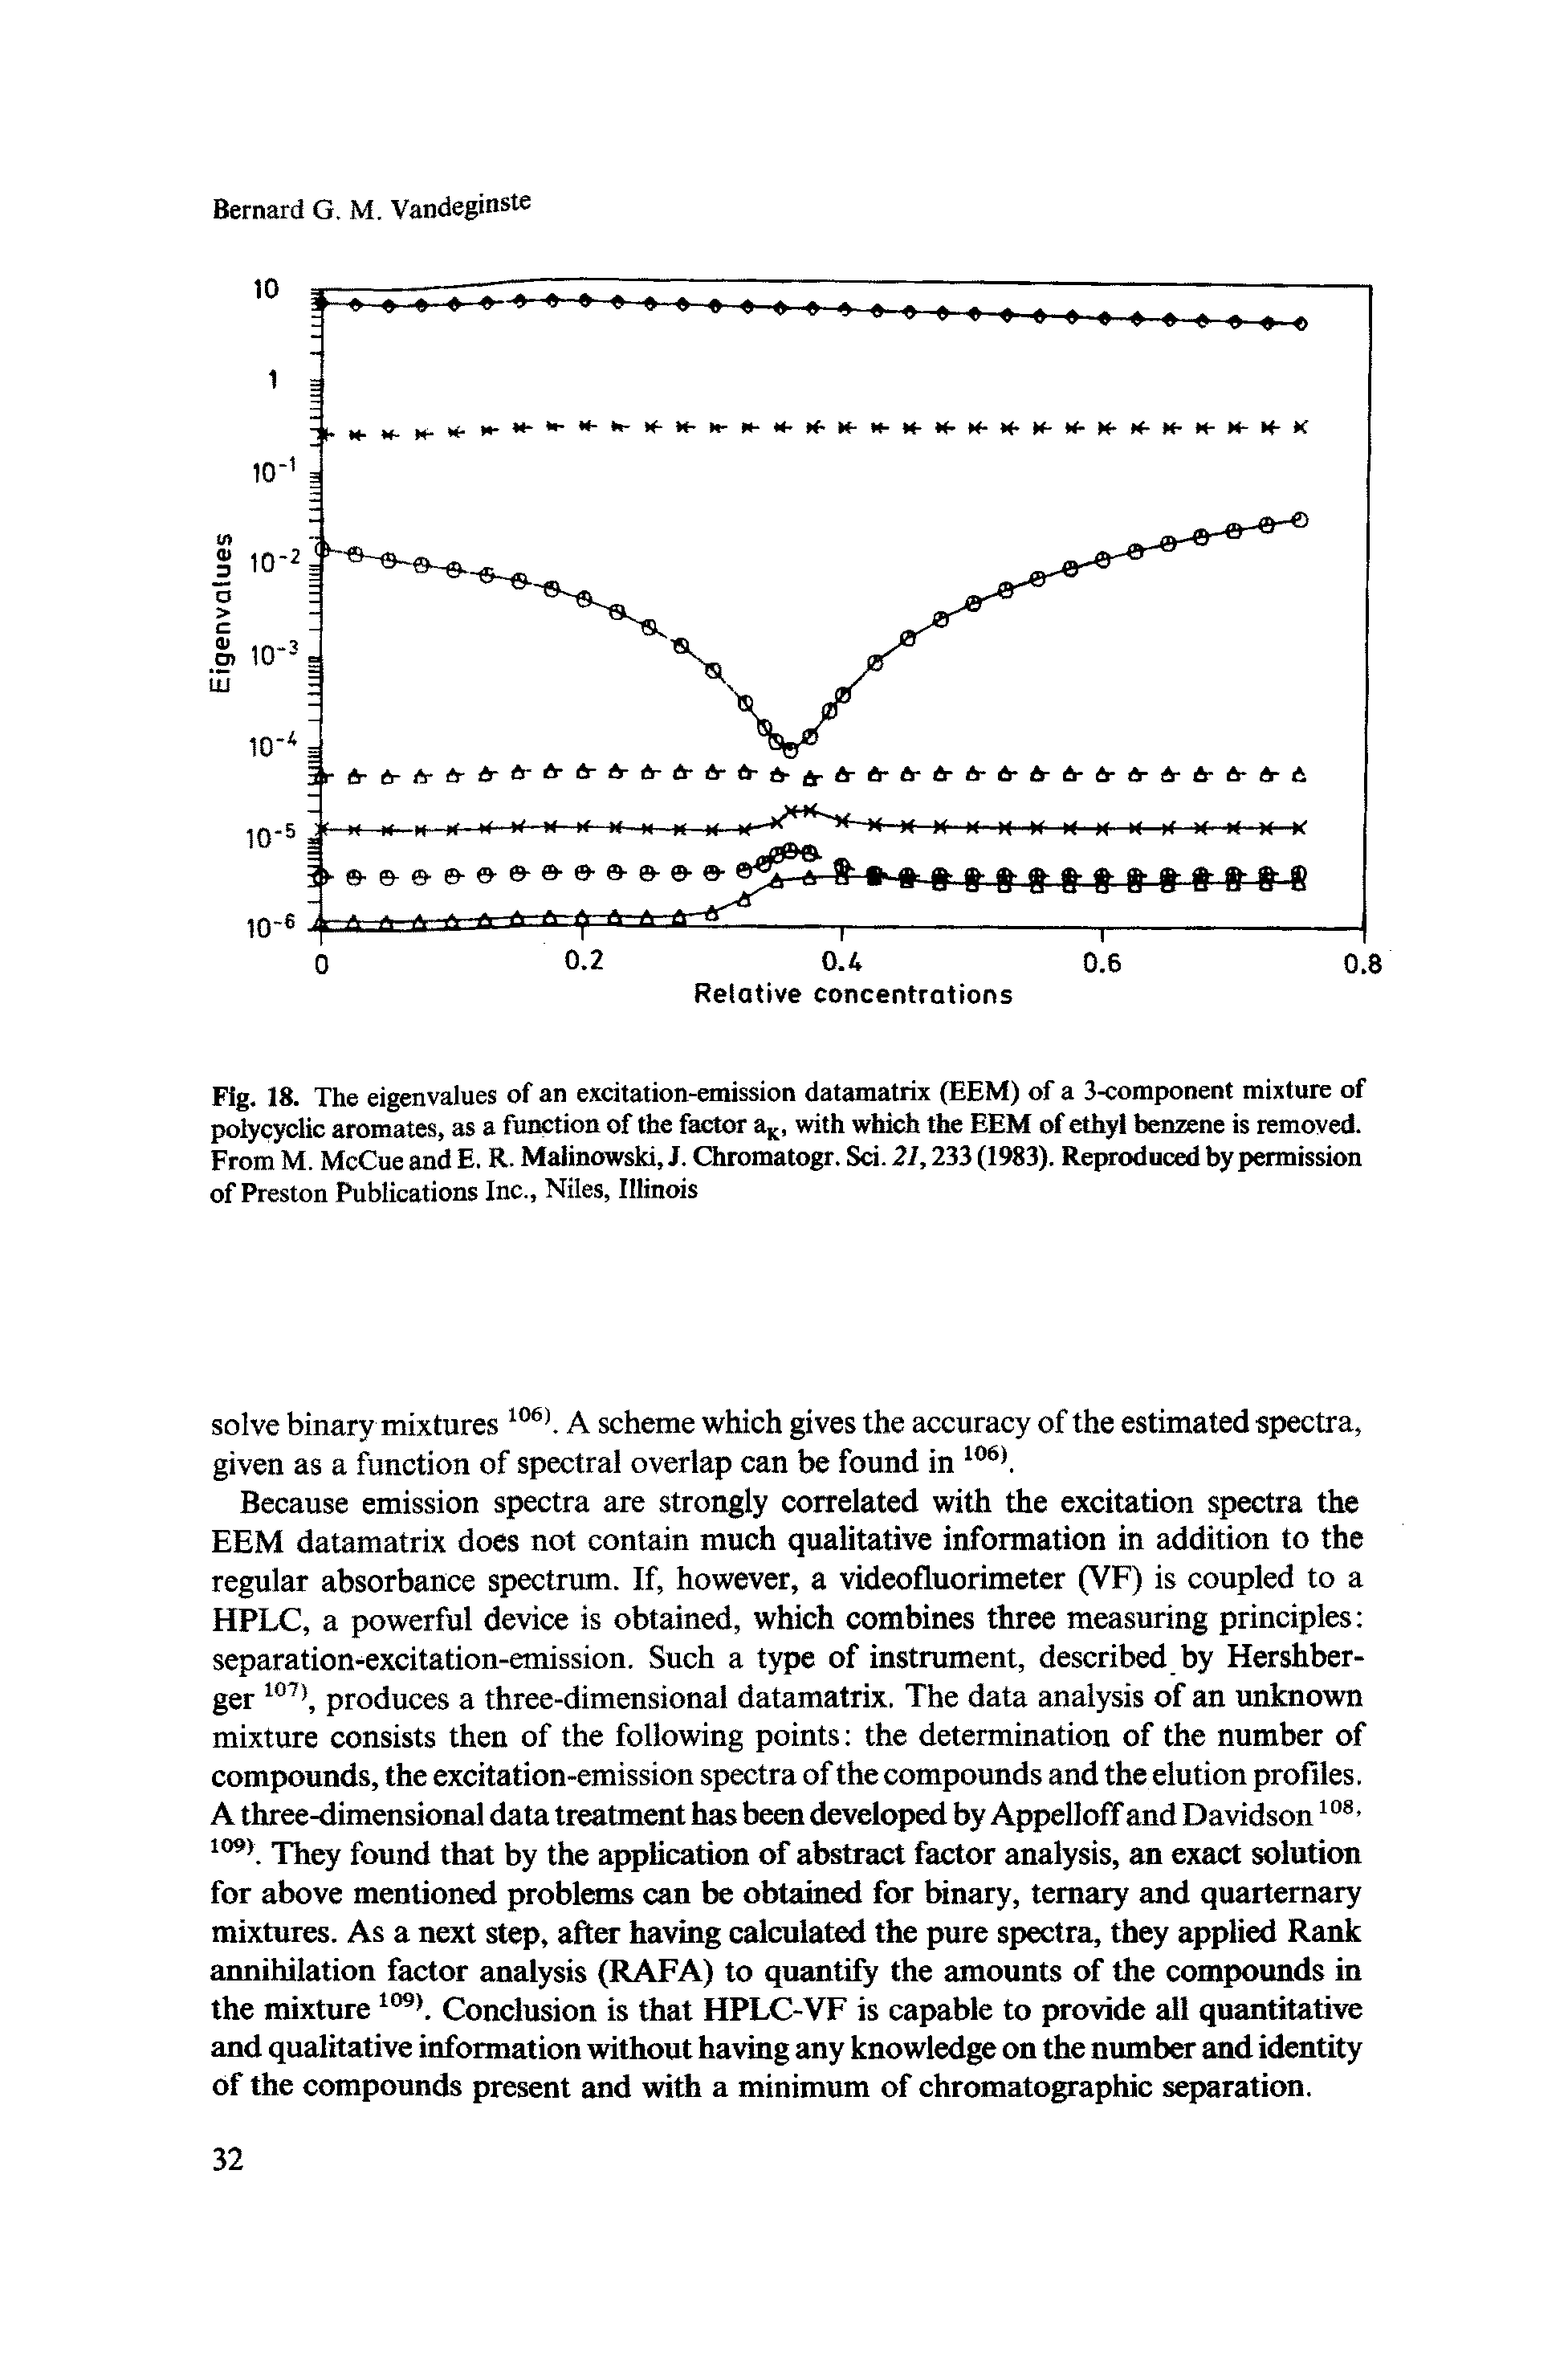 Fig. 18. The eigenvalues of an excitation-emission datamatrix (EEM) of a 3-component mixture of polycyclic aromates, as a function of the factor a, with which the EEM of ethyl benzene is removed. FromM. McCueandE. R. Malinowski, J. Chromatogr. Sci.2/, 233(1983). Reproduced by permission of Preston Publications Inc., Niles, Illinois...